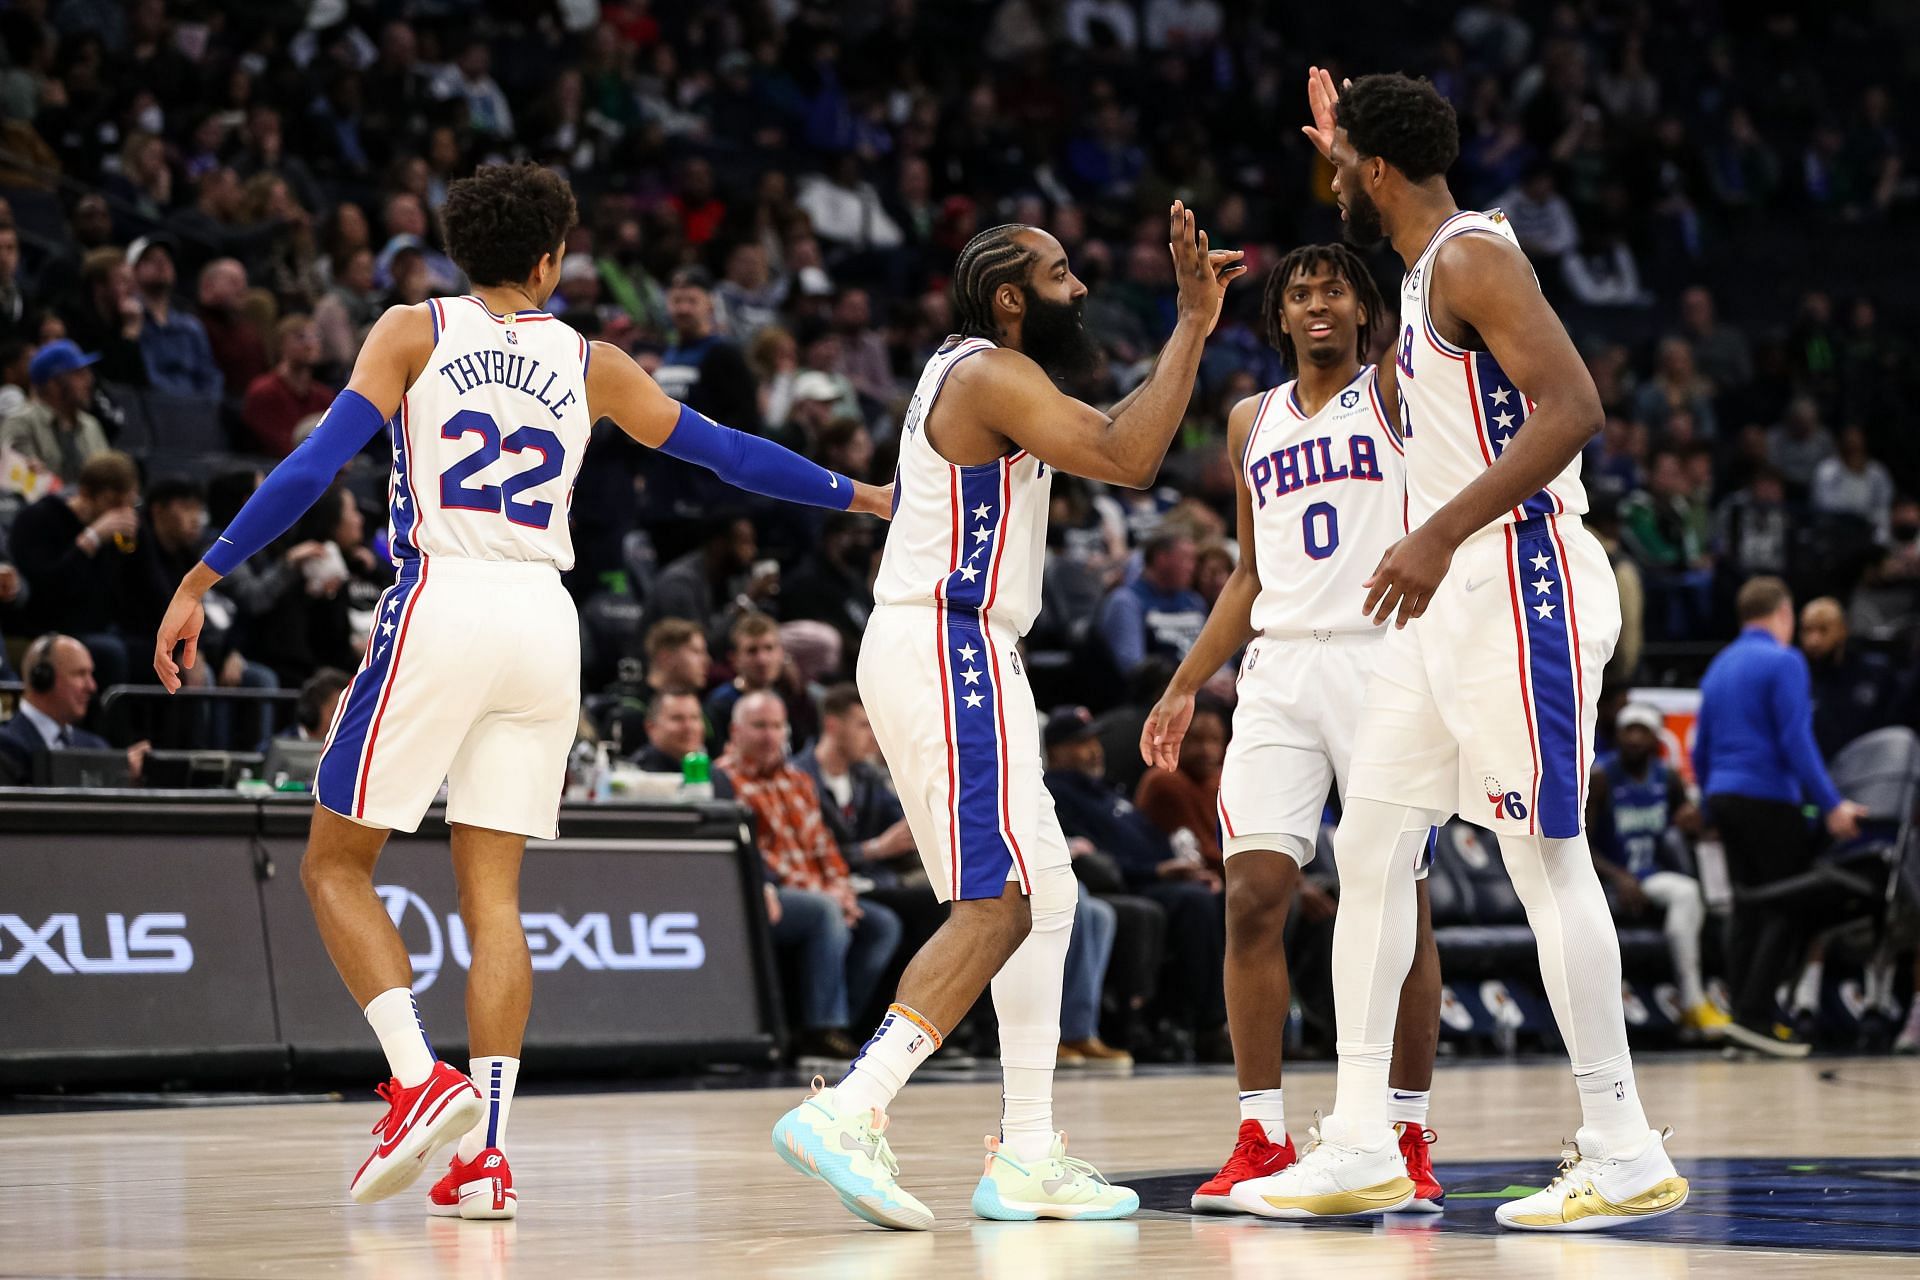 The Philadelphia 76ers have found their new Big 3